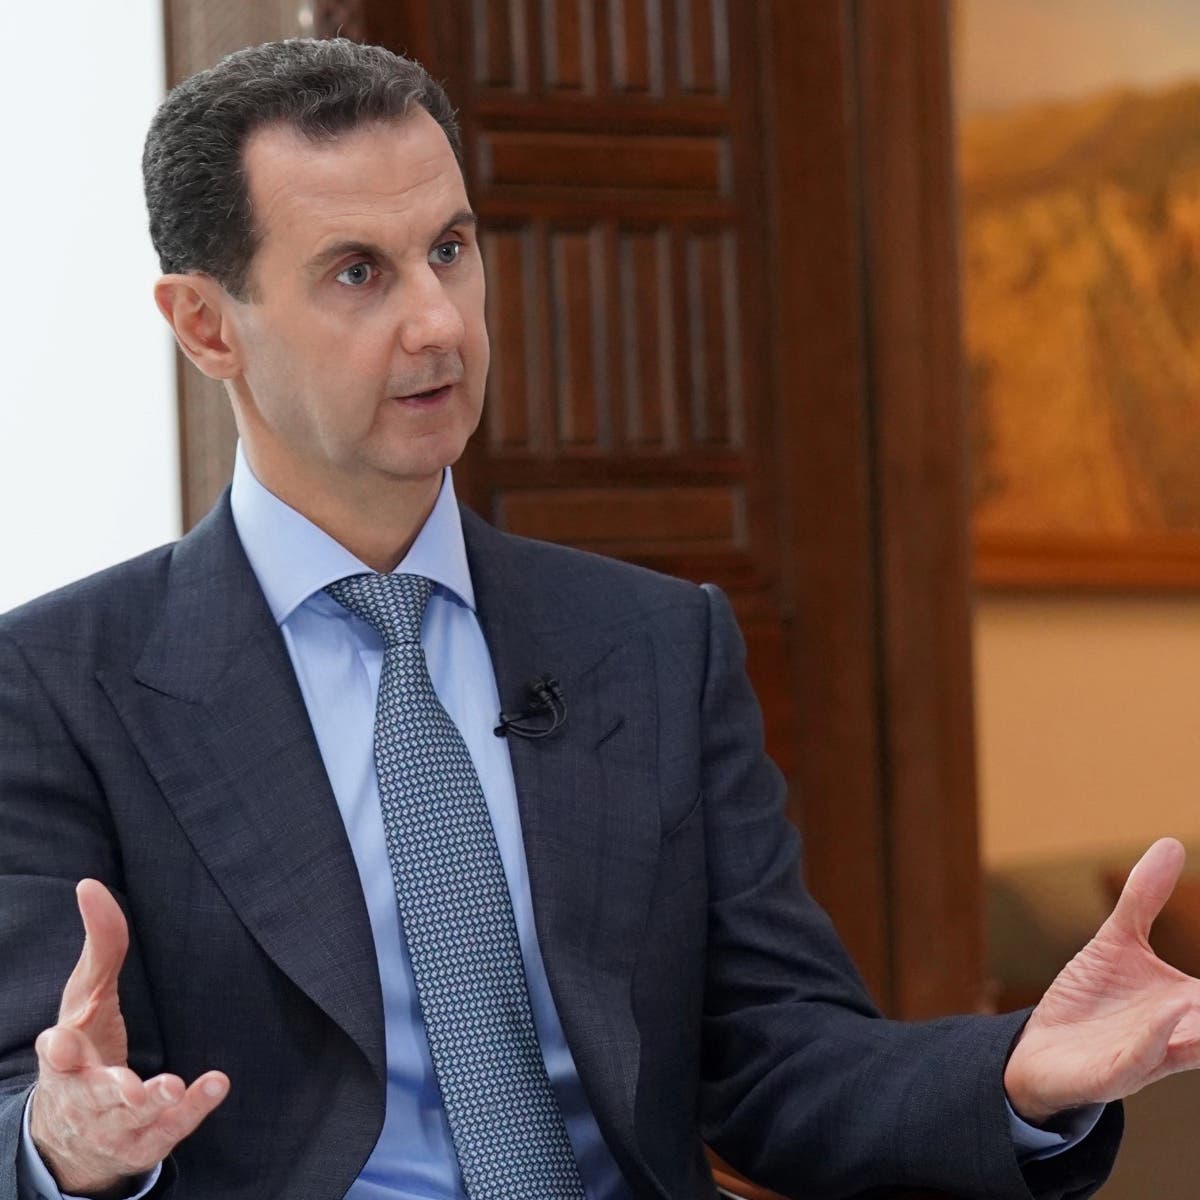 US officials criticize efforts to normalize ties with Syria’s Assad